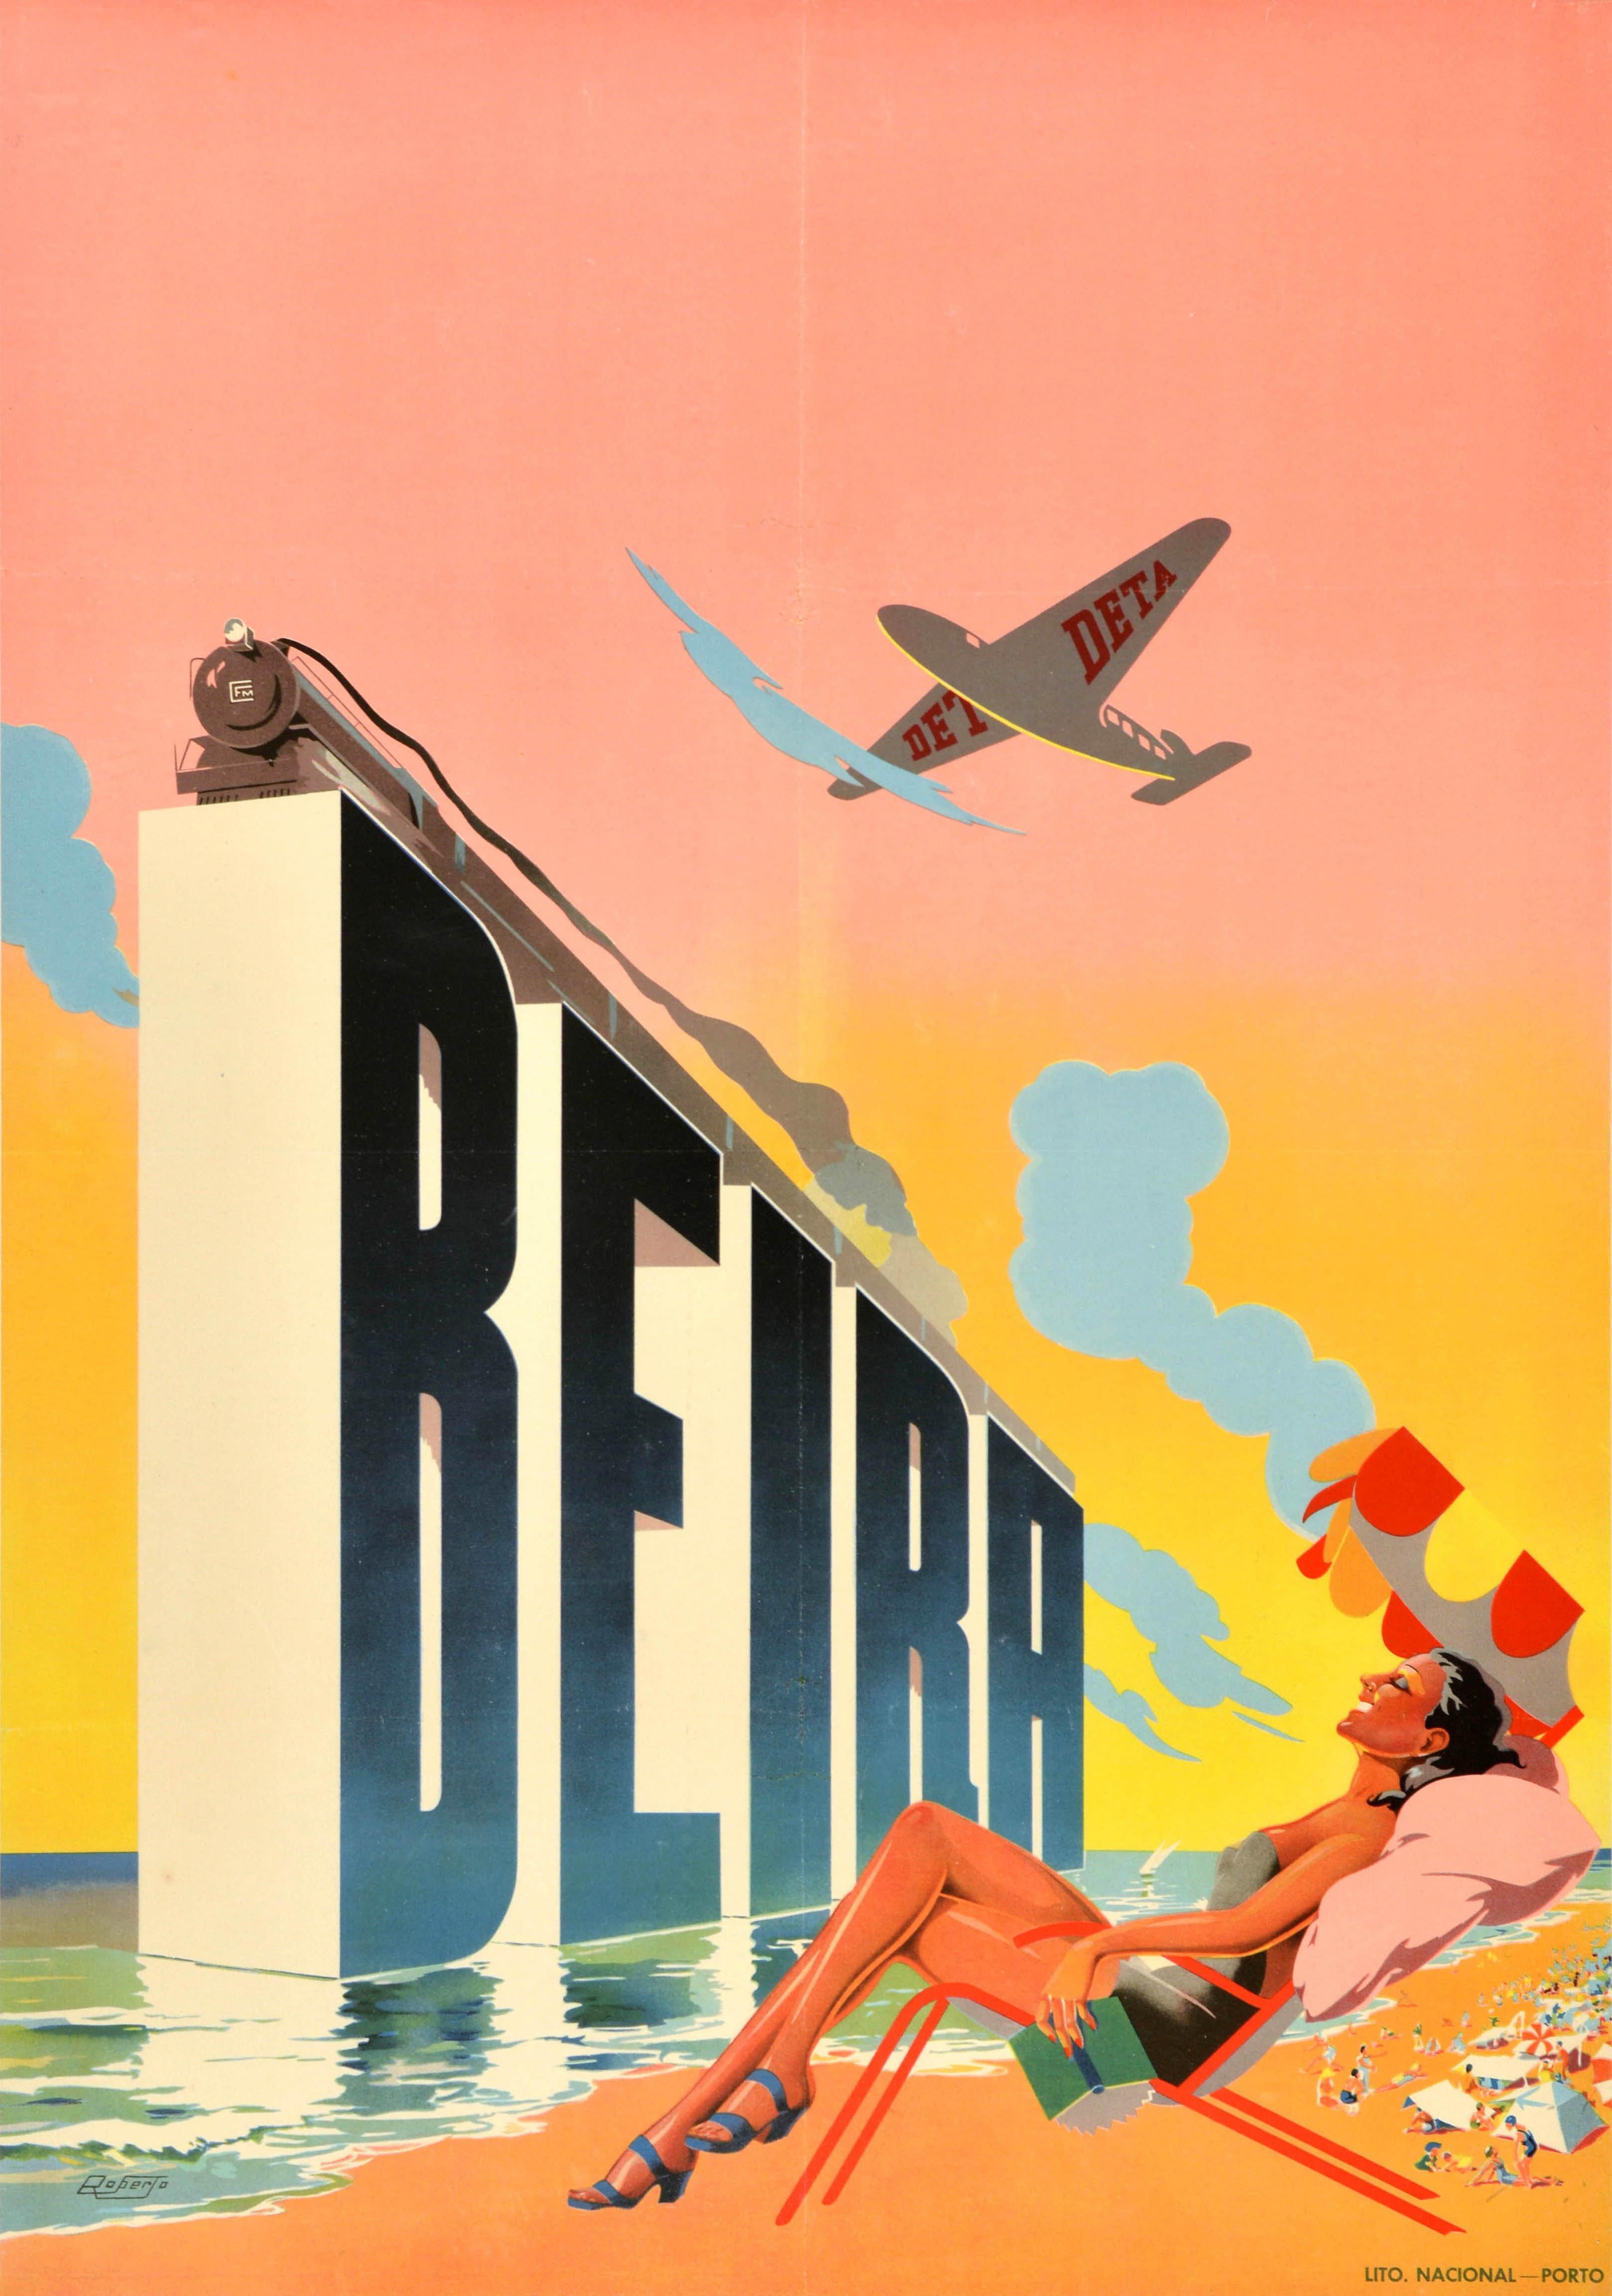 Original vintage Africa travel poster for the coastal port city of Beira in Mozambique featuring stunning artwork depicting a lady sunbathing on a deck chair and holding a book with more holiday makers visible on the sandy beach in the background,